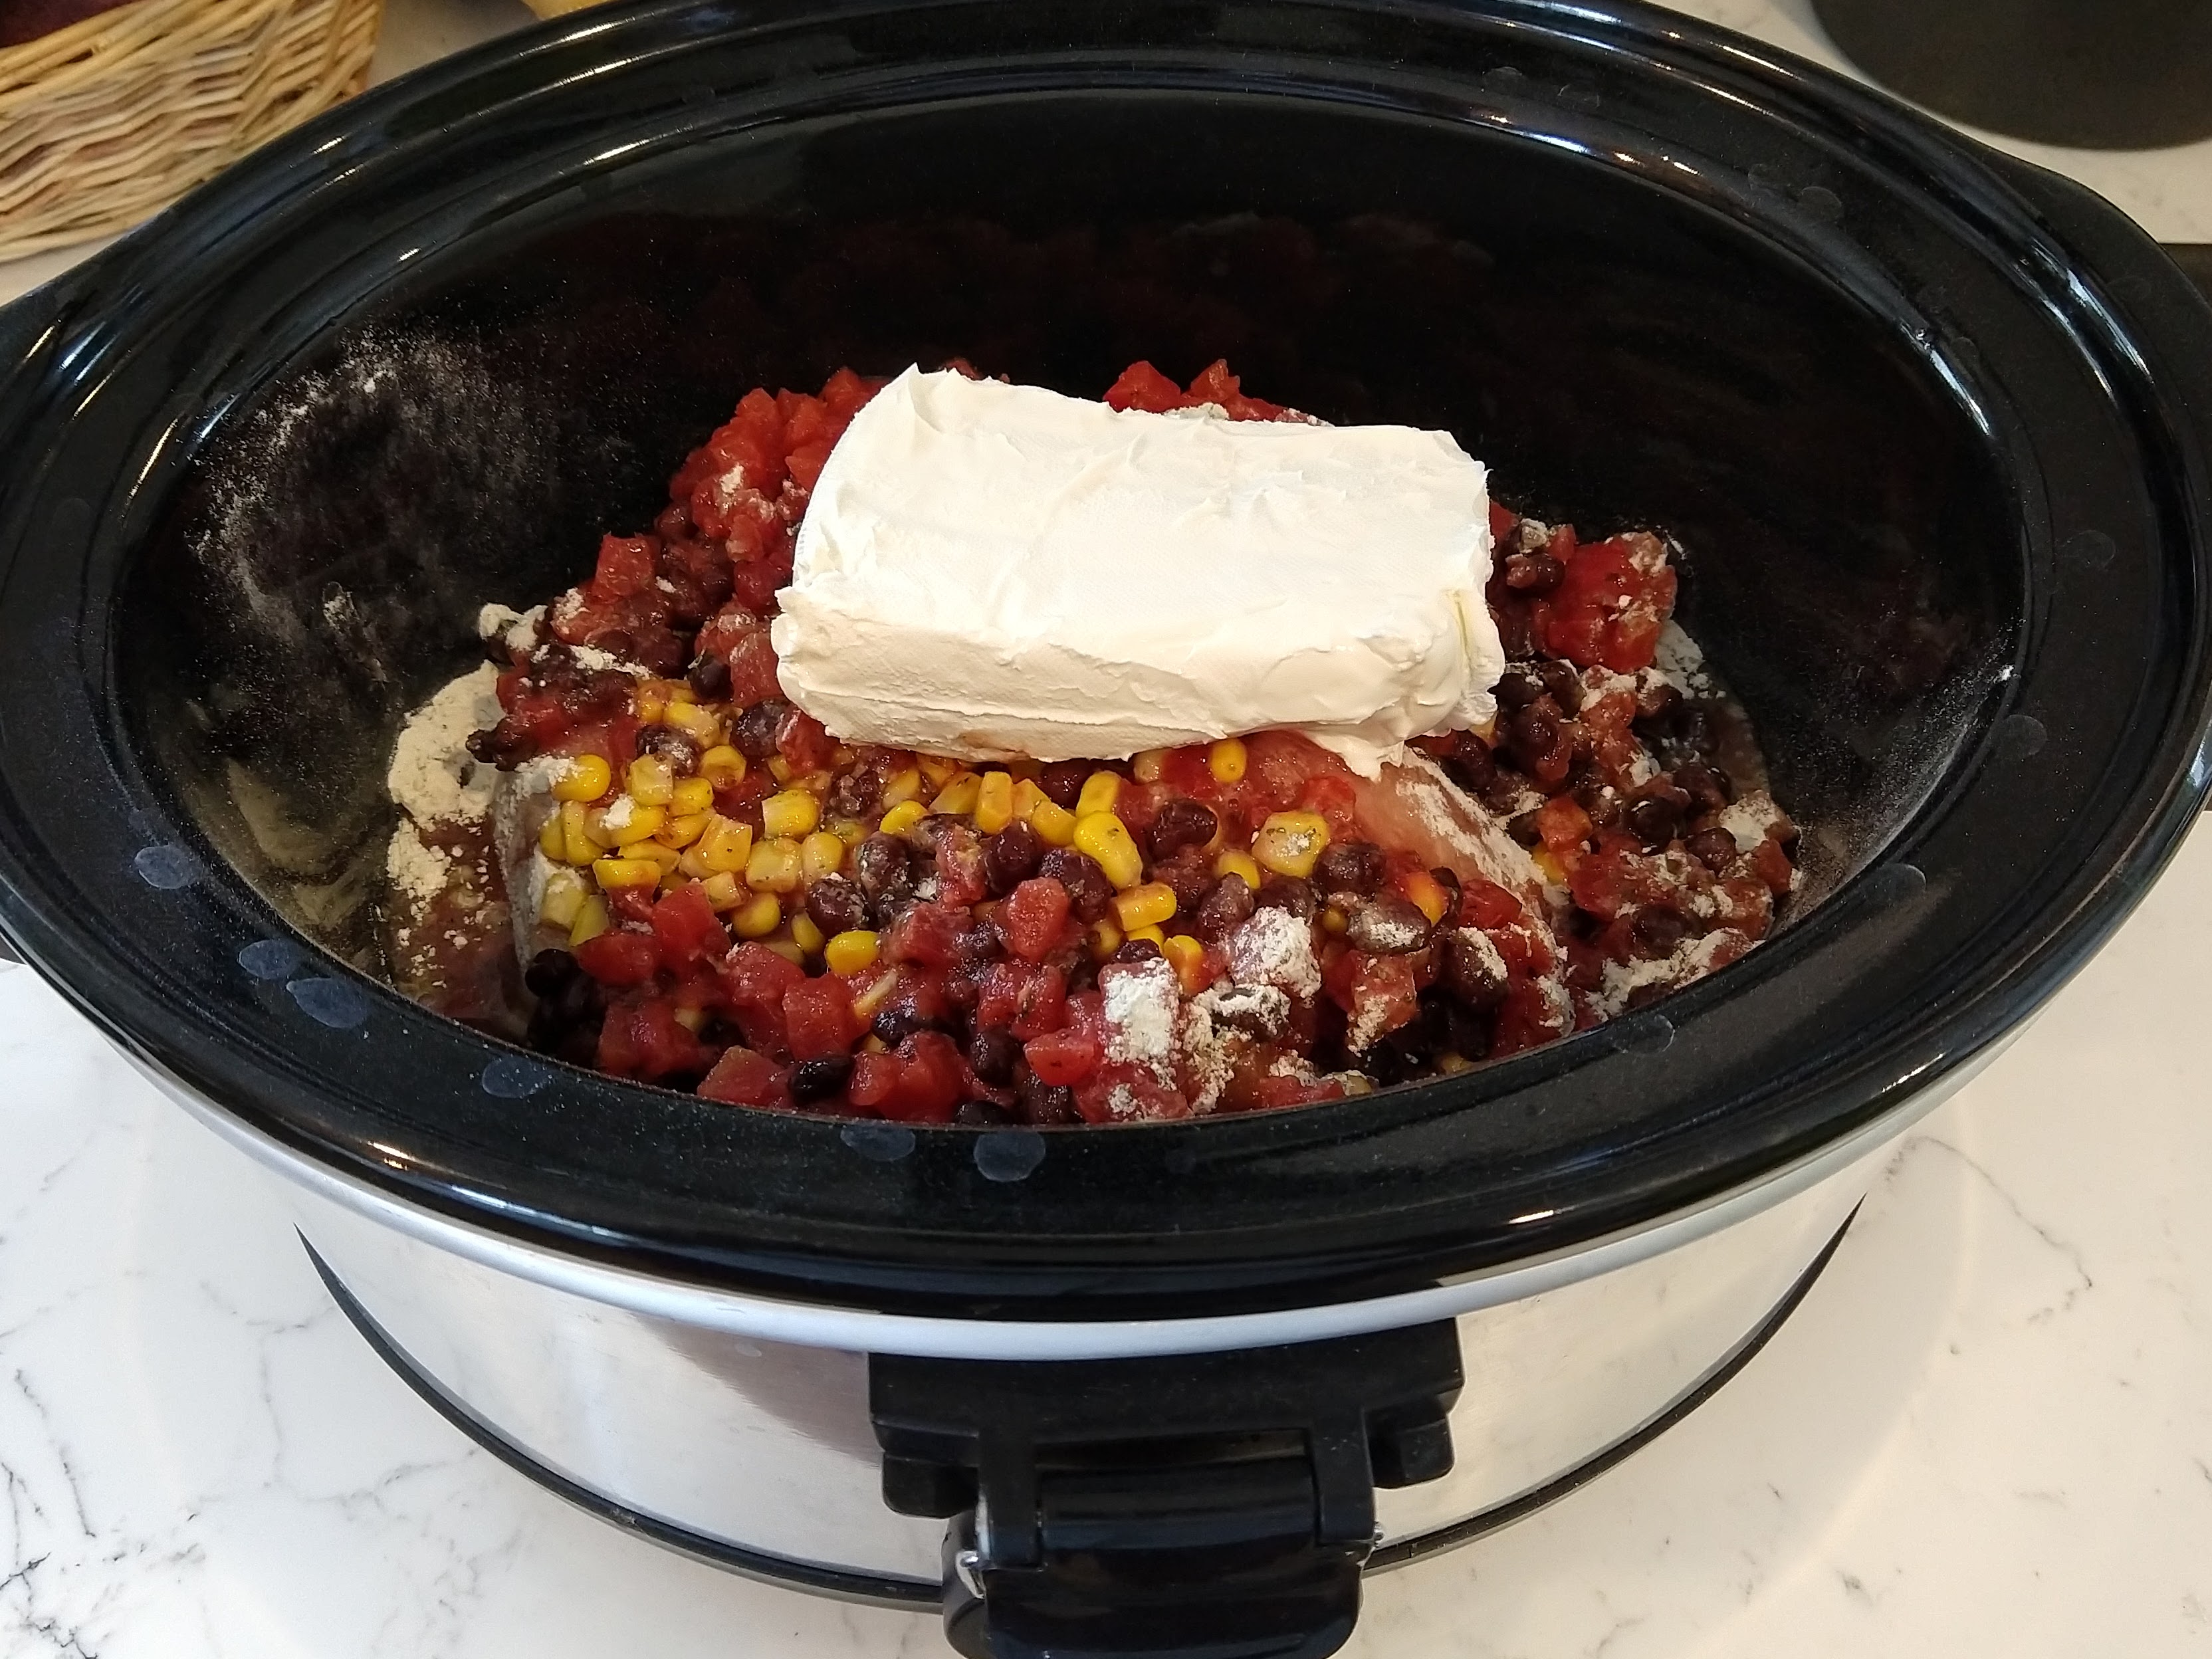 Raw ingredients in a slow cooker.